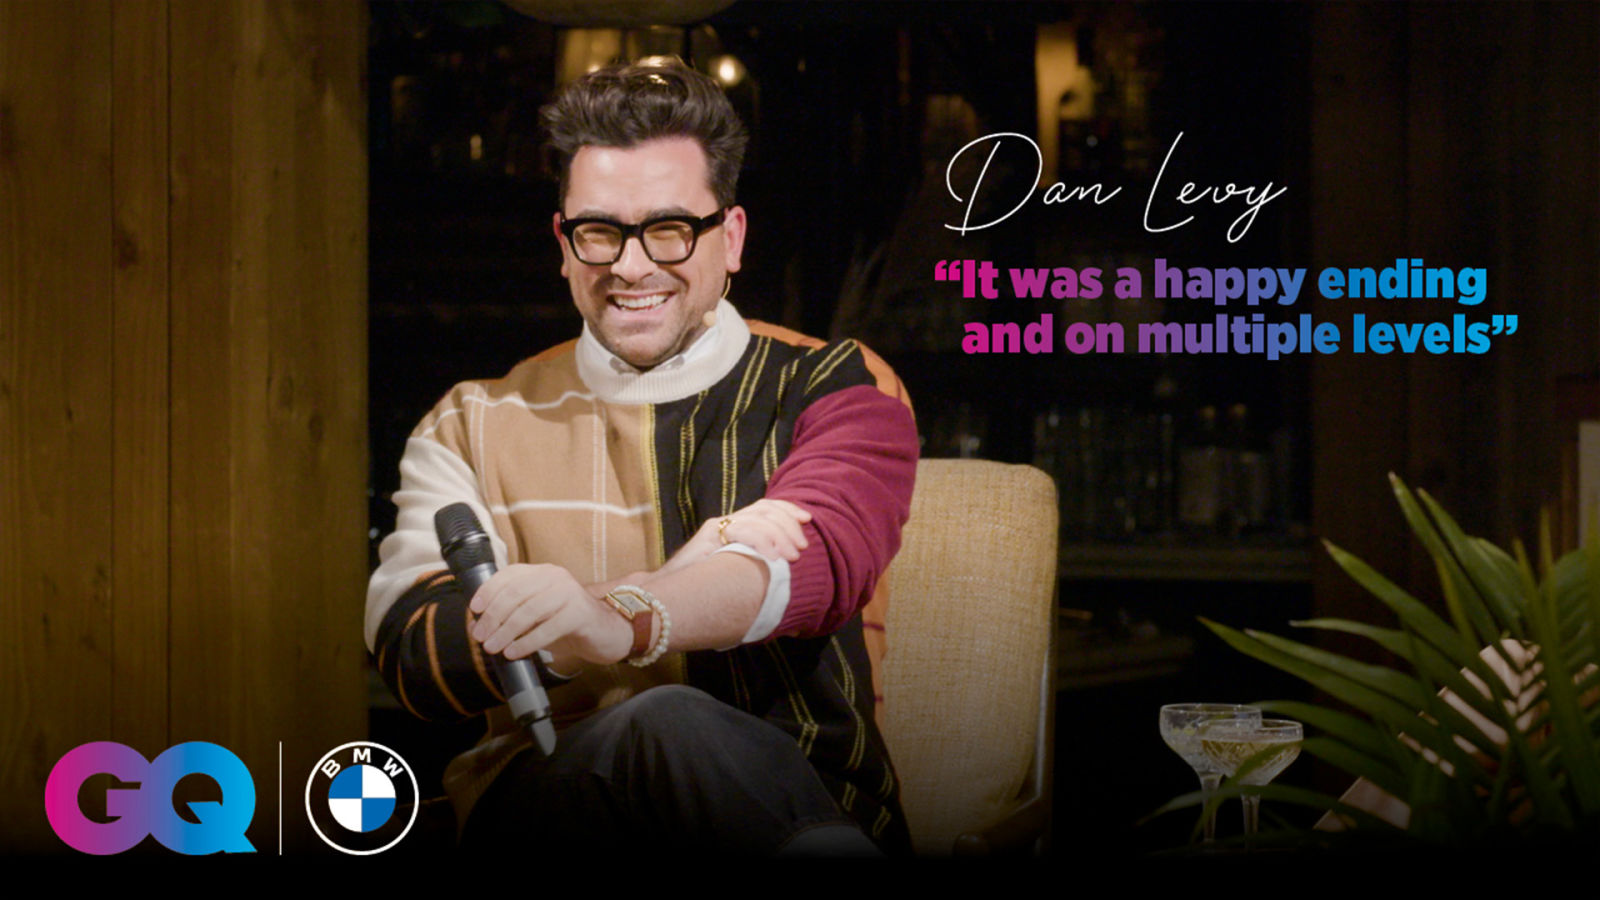 Dan Levy on representation in Schitt's Creek, celebrating queer love and Moira Rose's iconic outfits